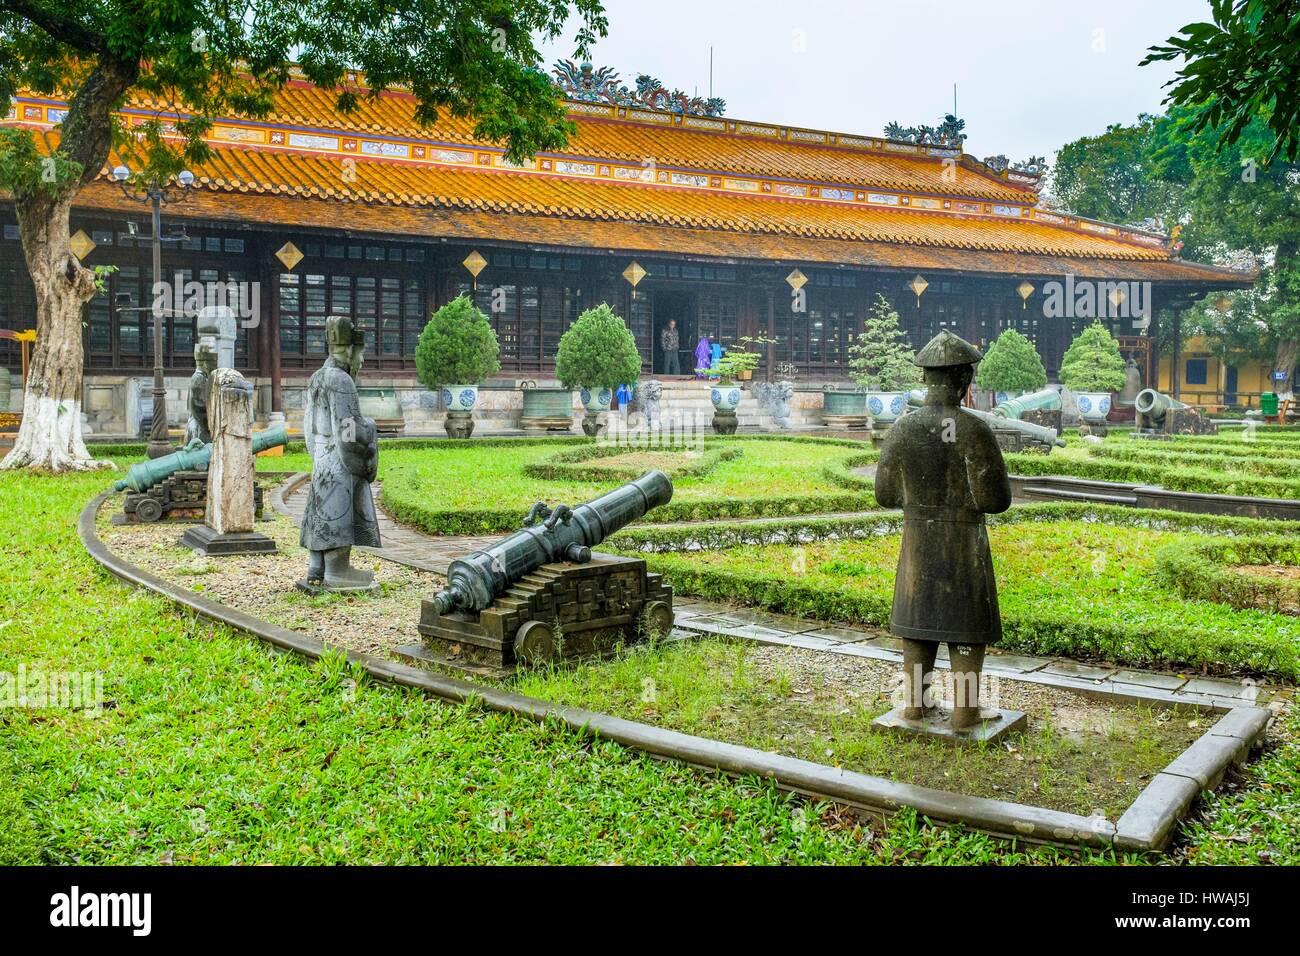 Vietnam, North Central Coast region, Thua Thien-Hue province, Hue, Museum of Royal Antiquities Stock Photo